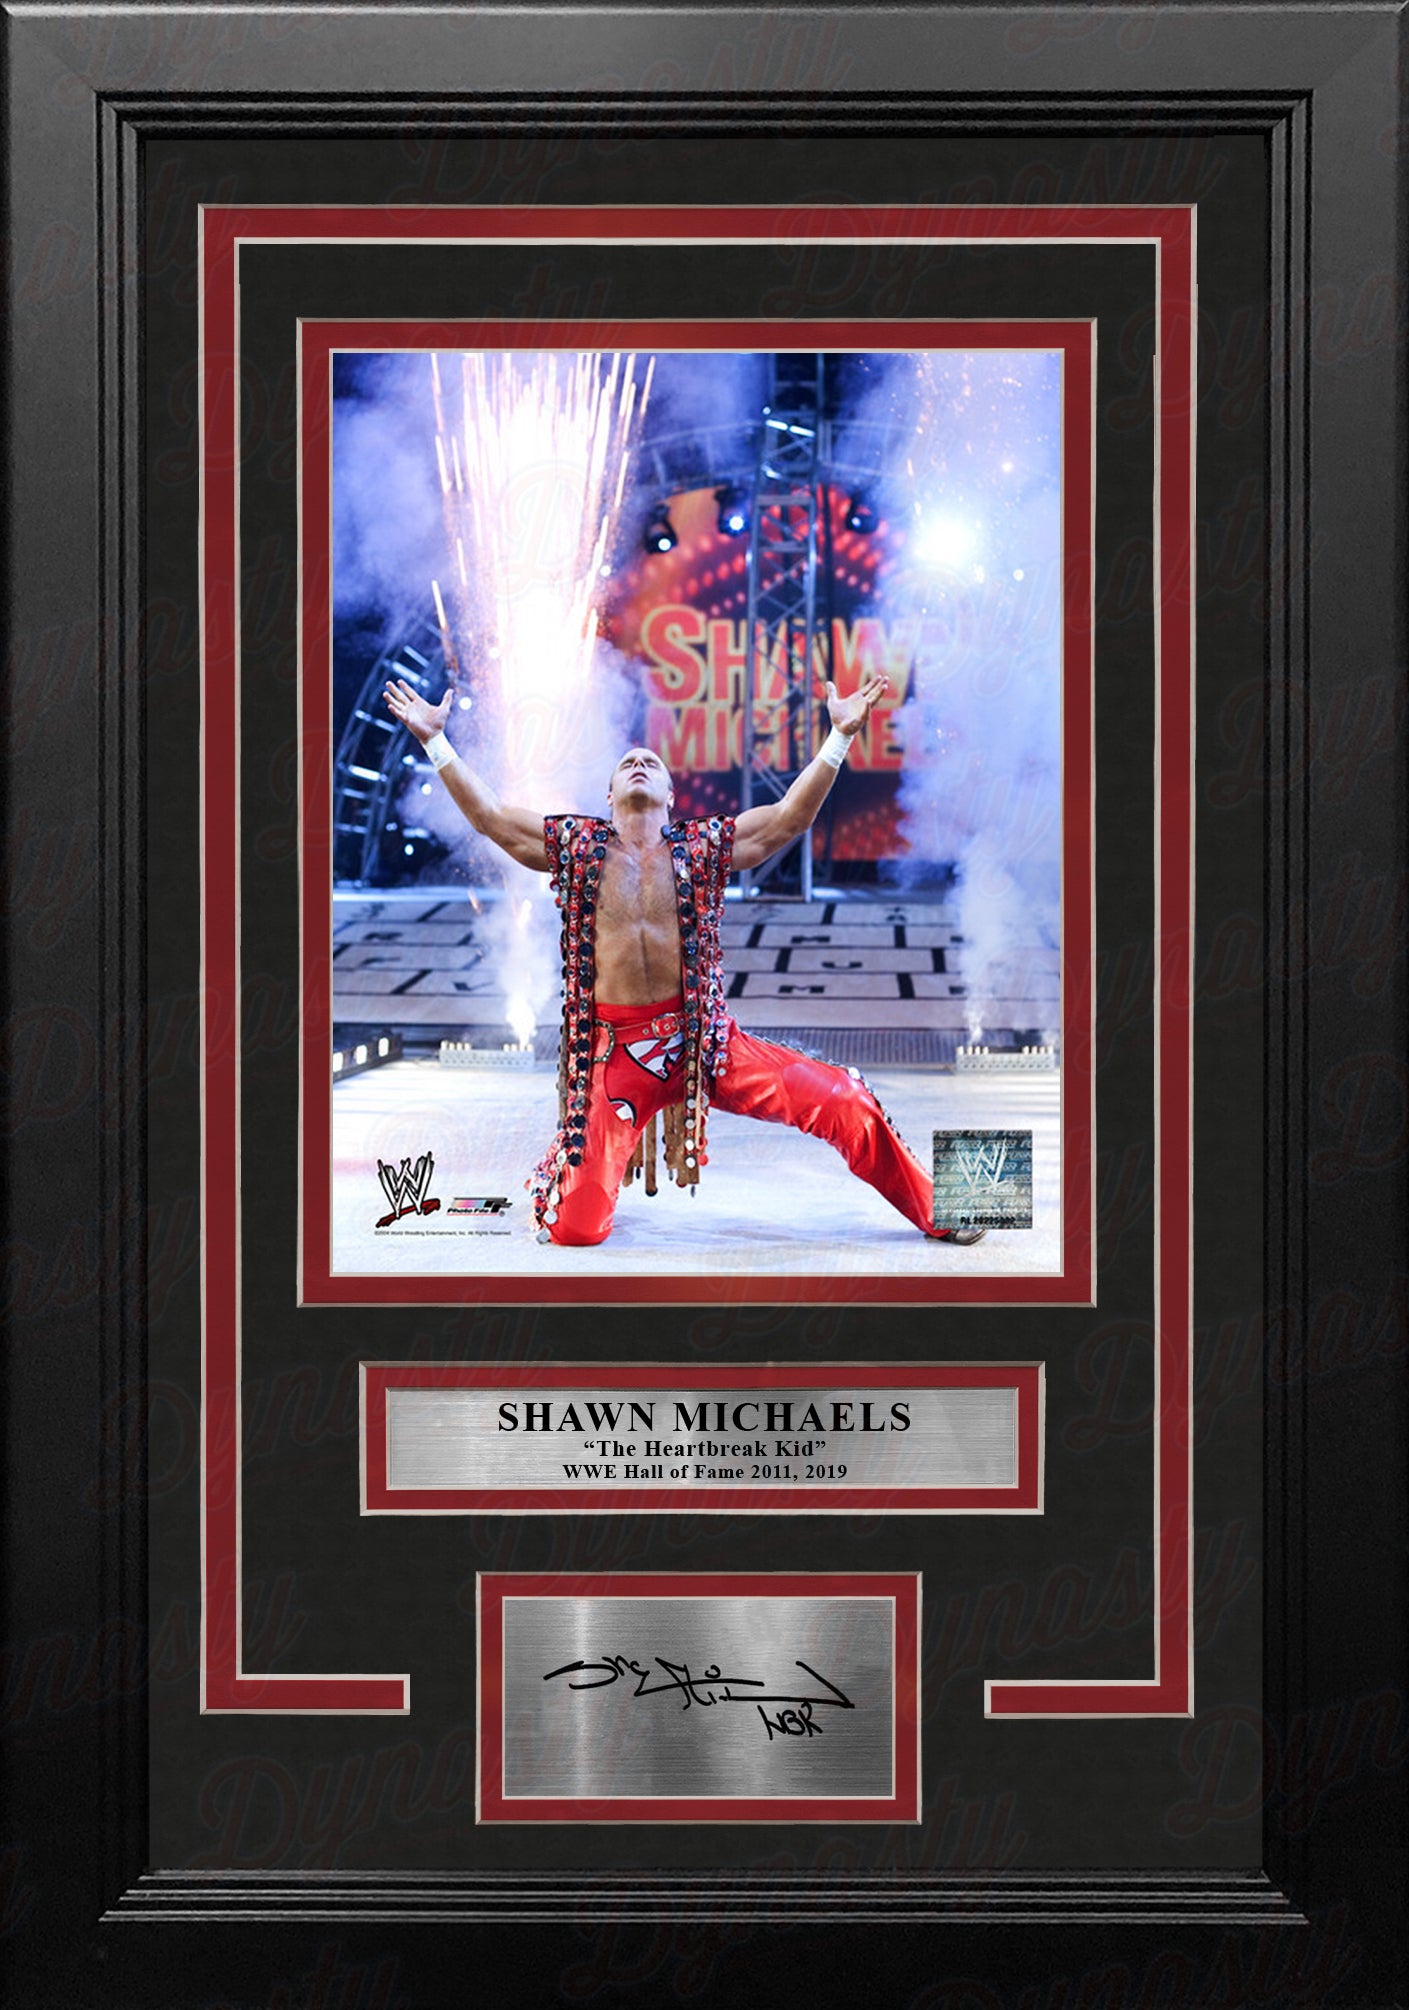 Shawn Michaels Pyro Entrance 8" x 10" Framed WWE Wrestling Photo with Engraved Autograph - Dynasty Sports & Framing 